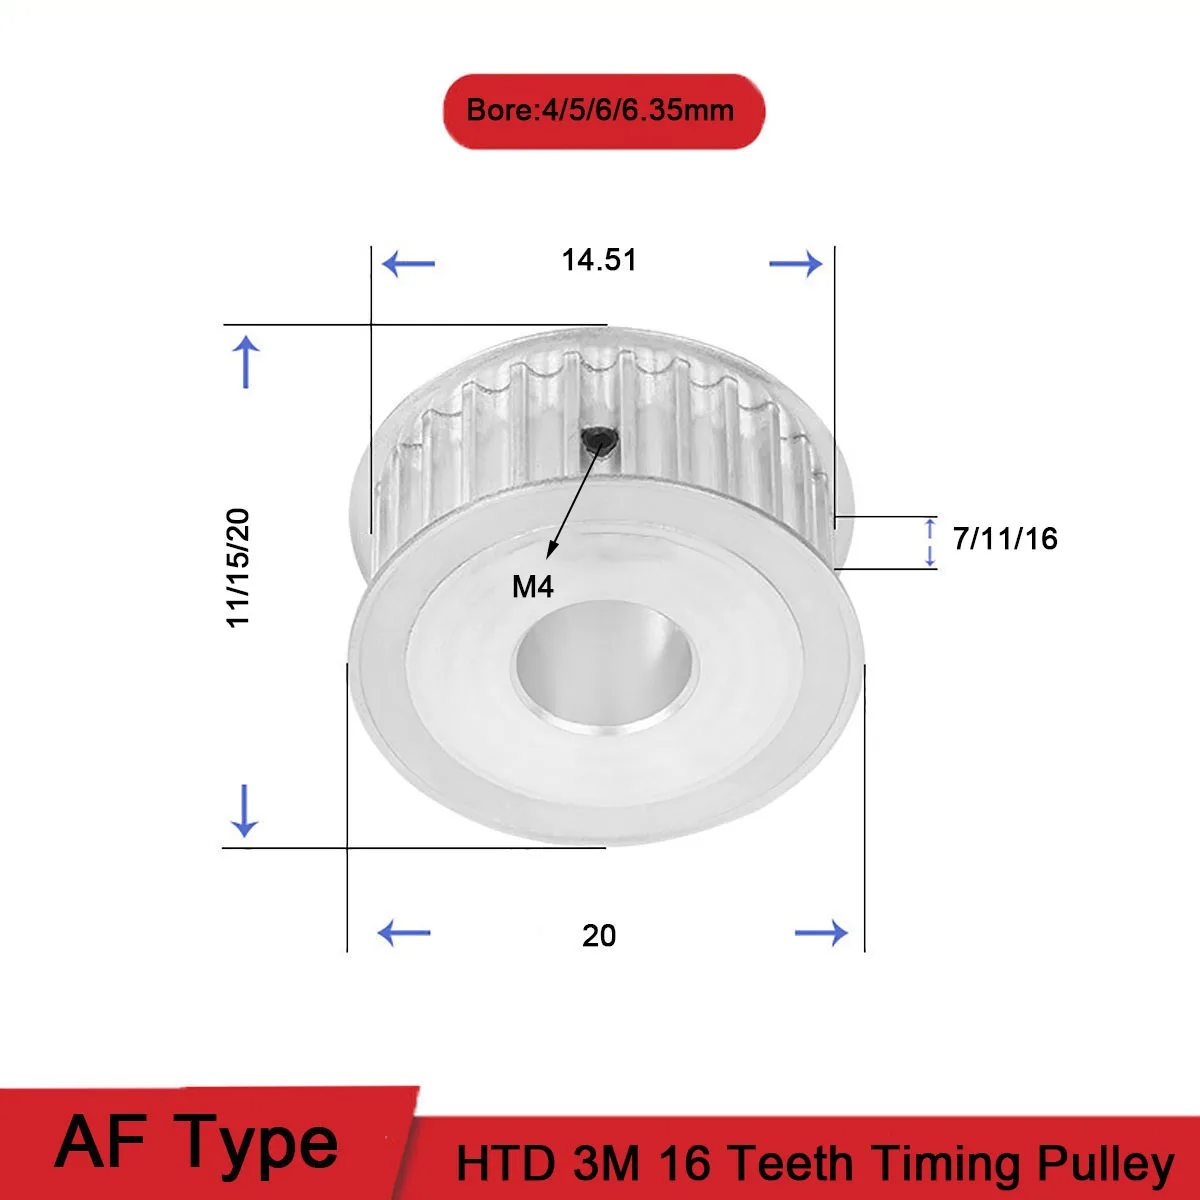 HTD 3M 16T Timing Pulley Bore 4/5/6/6.35mm Gear Pulley 3mm Pitch Teeth Width 7/11/16mm Aluminum Synchronous Timing Belt Pulleys